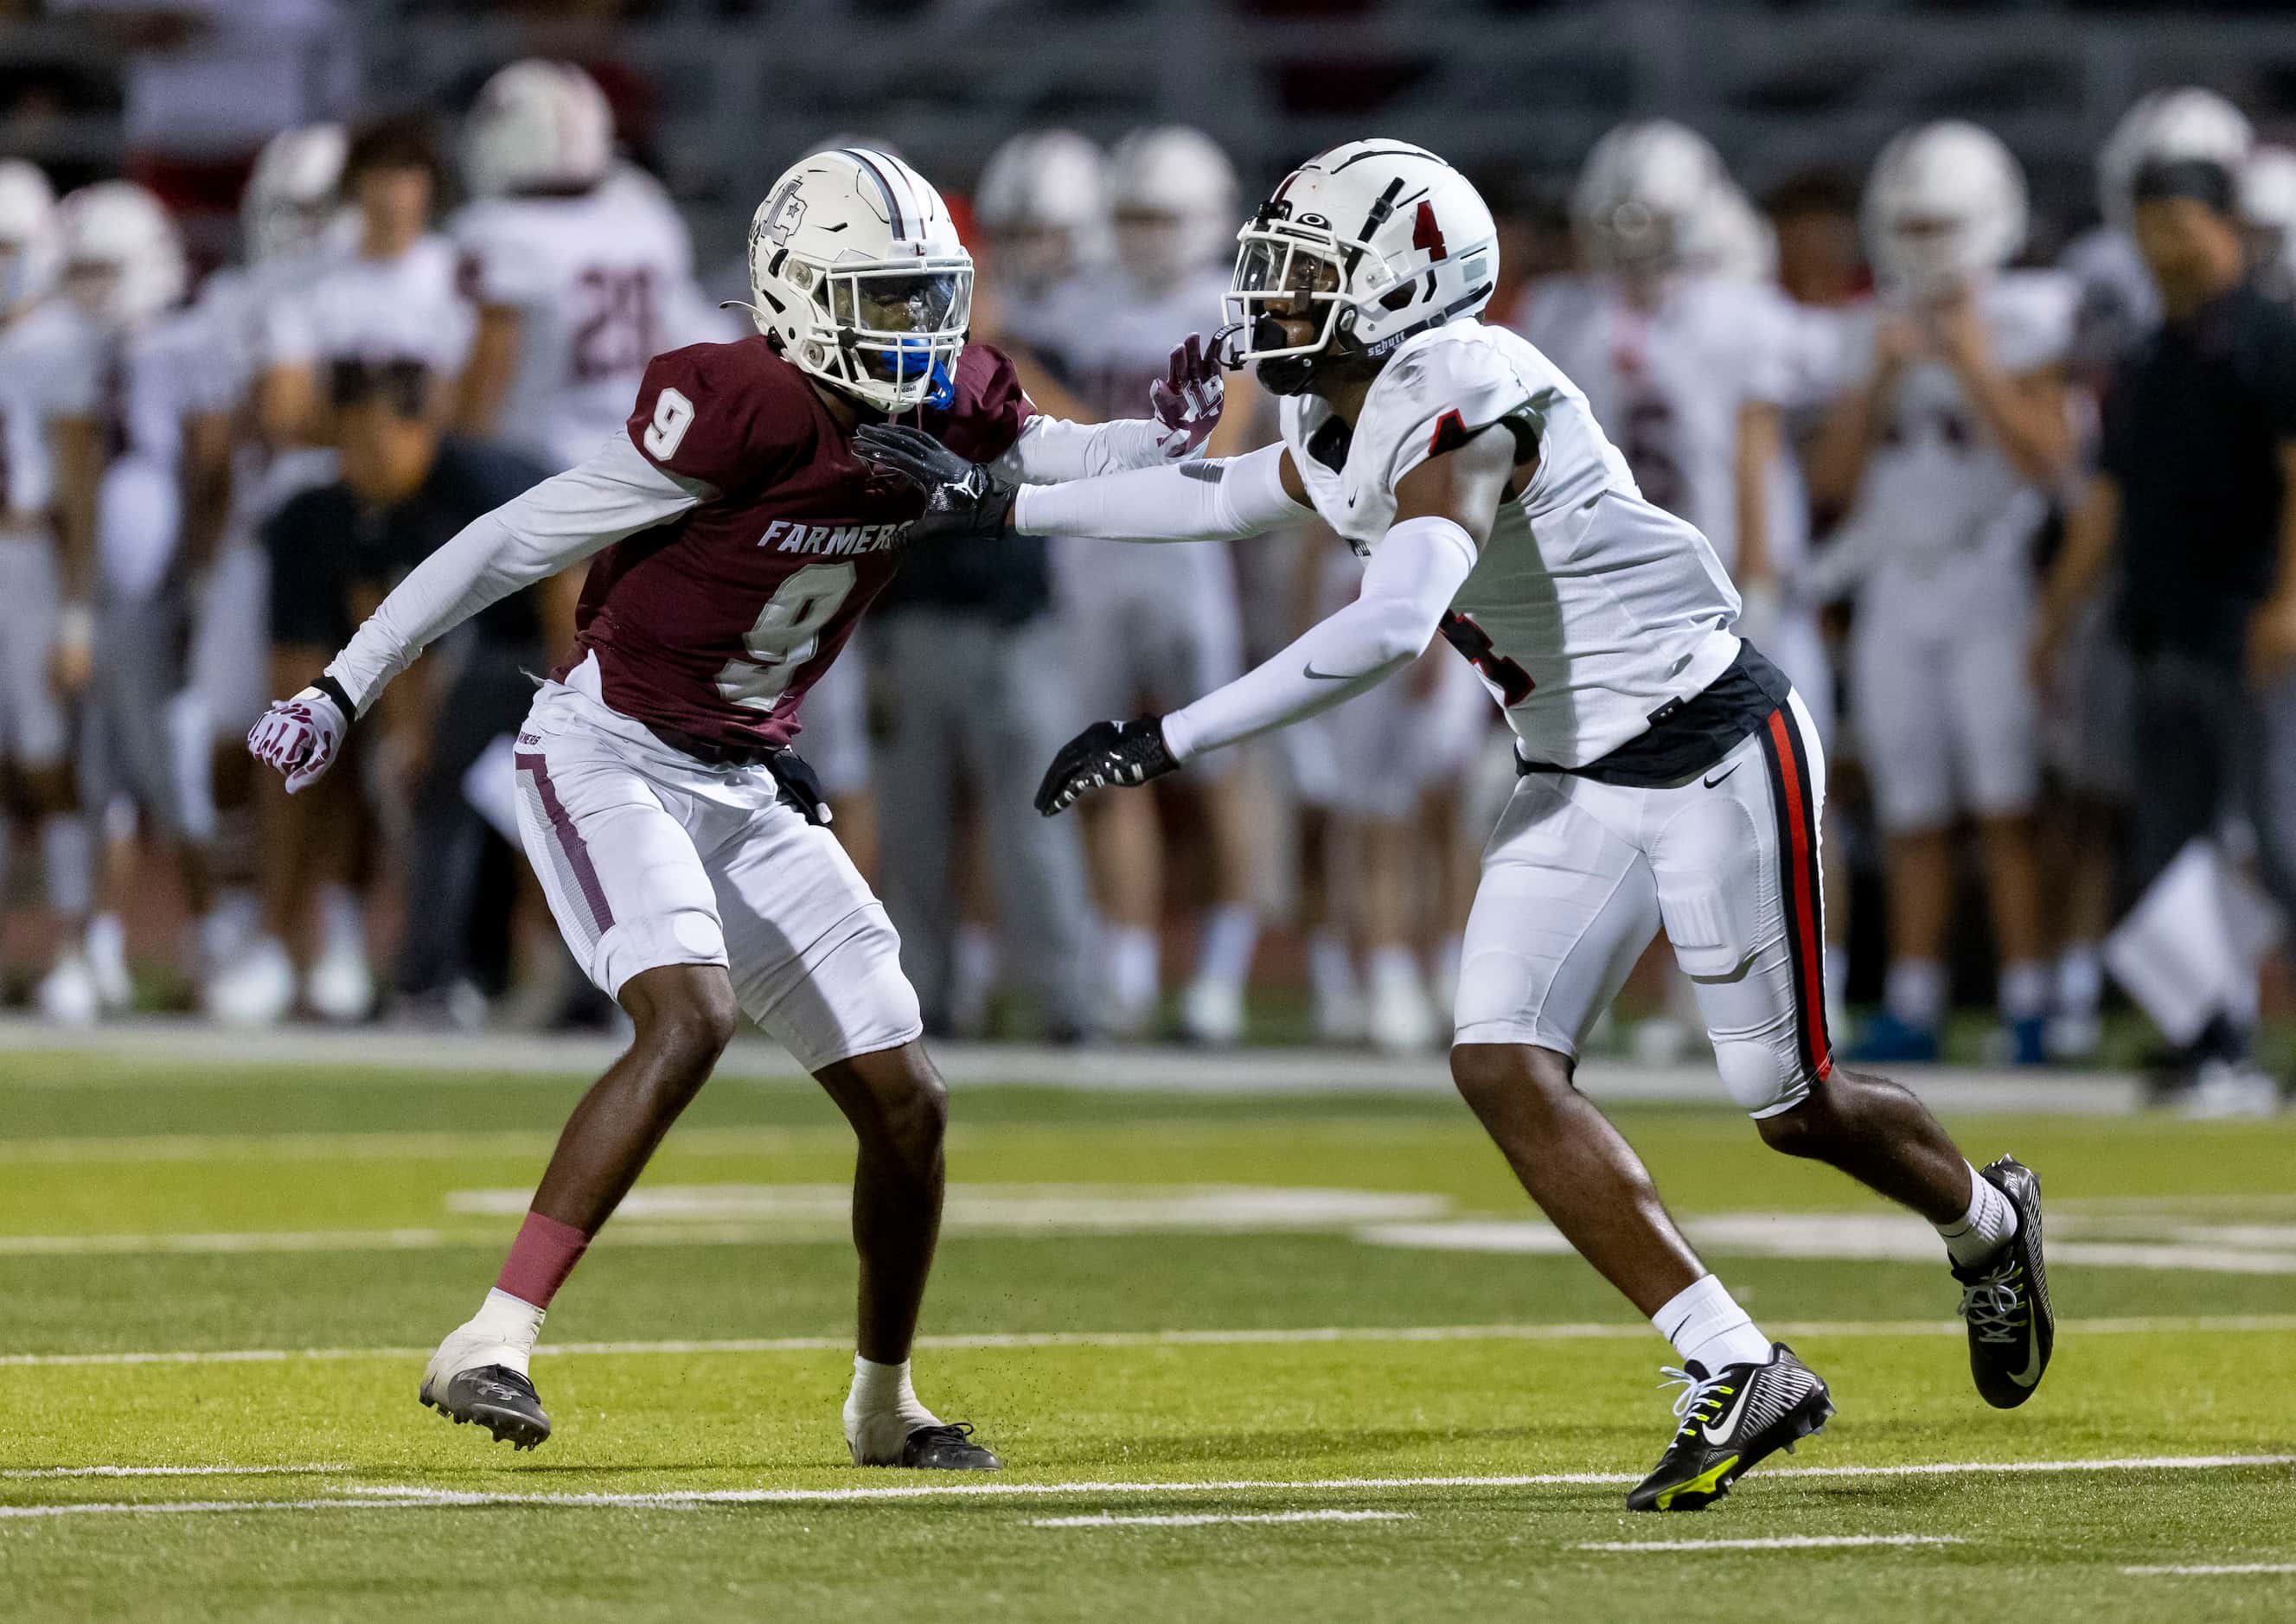 Coppell senior defensive back Braxton Myers (4) defends against Lewisville junior wide...